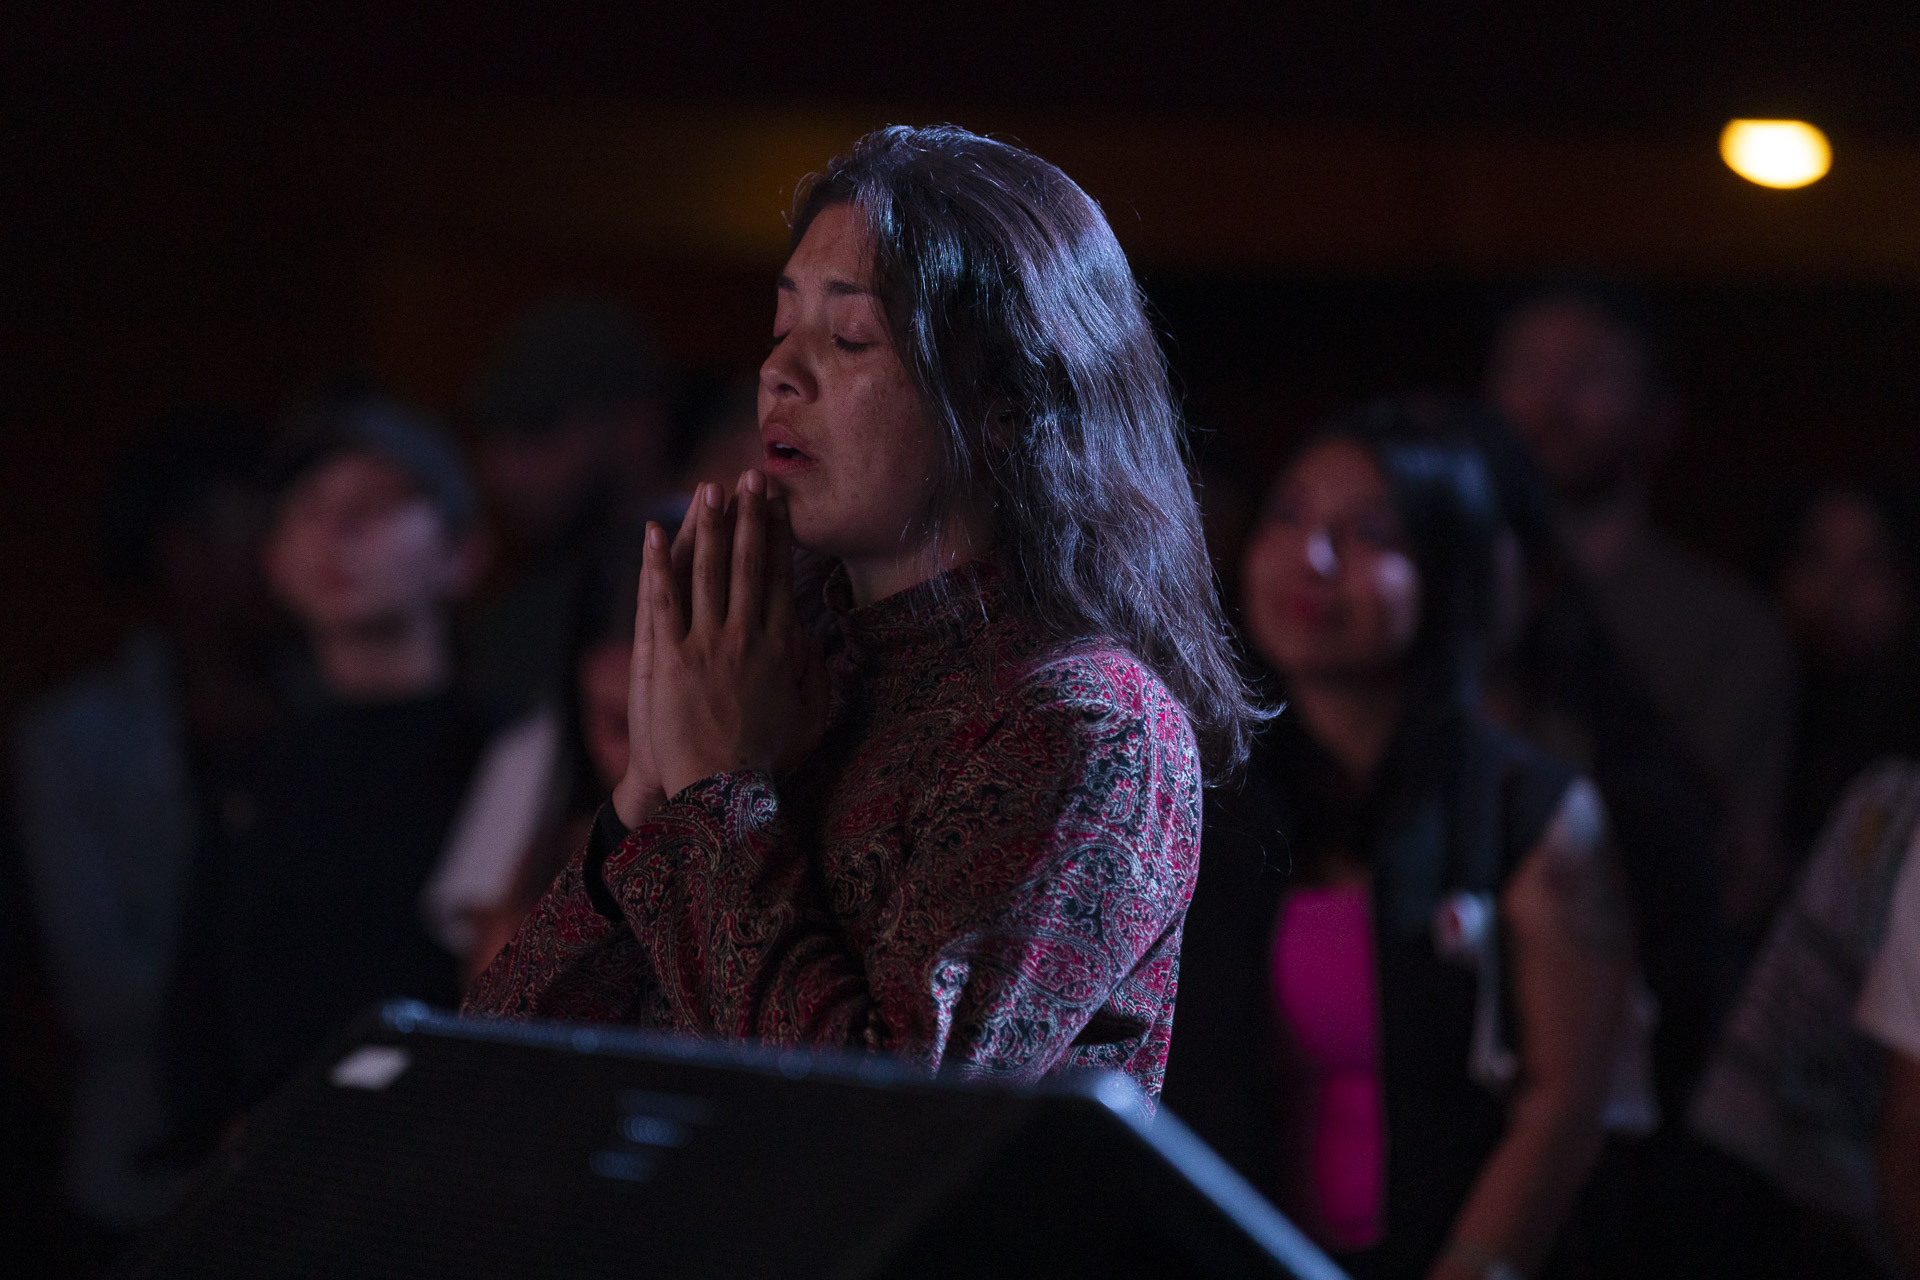 A woman in the audience closes her eyes while listening to a concert.